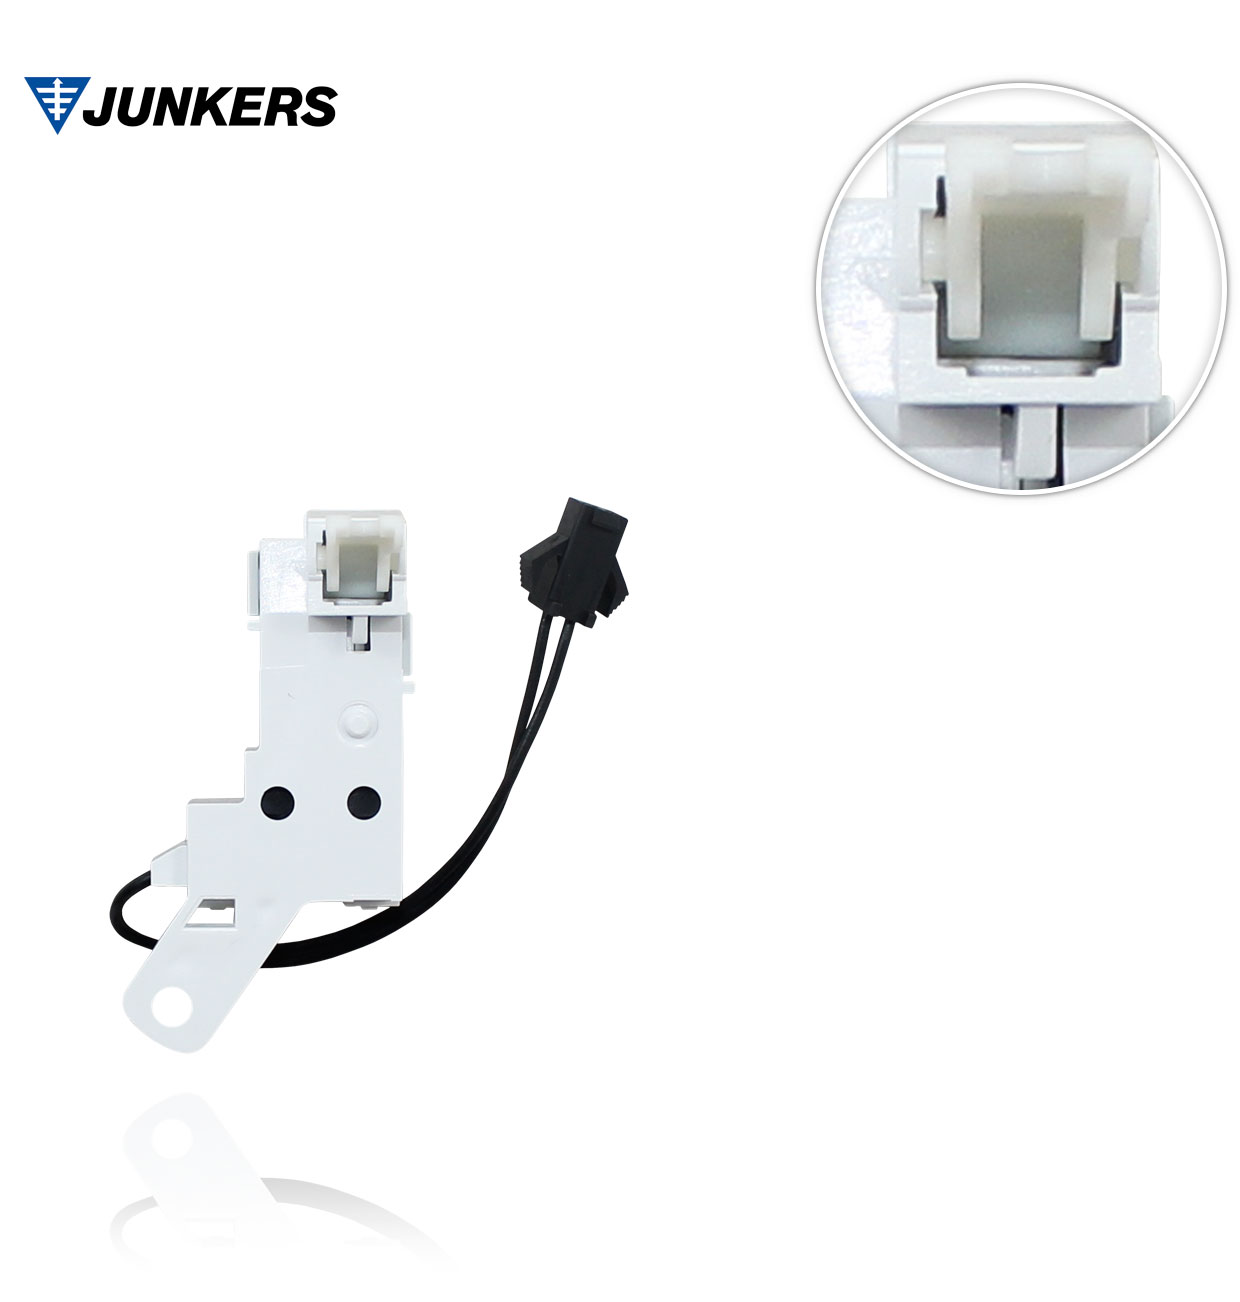 JUNKERS 8707200020 MICROSWITCH